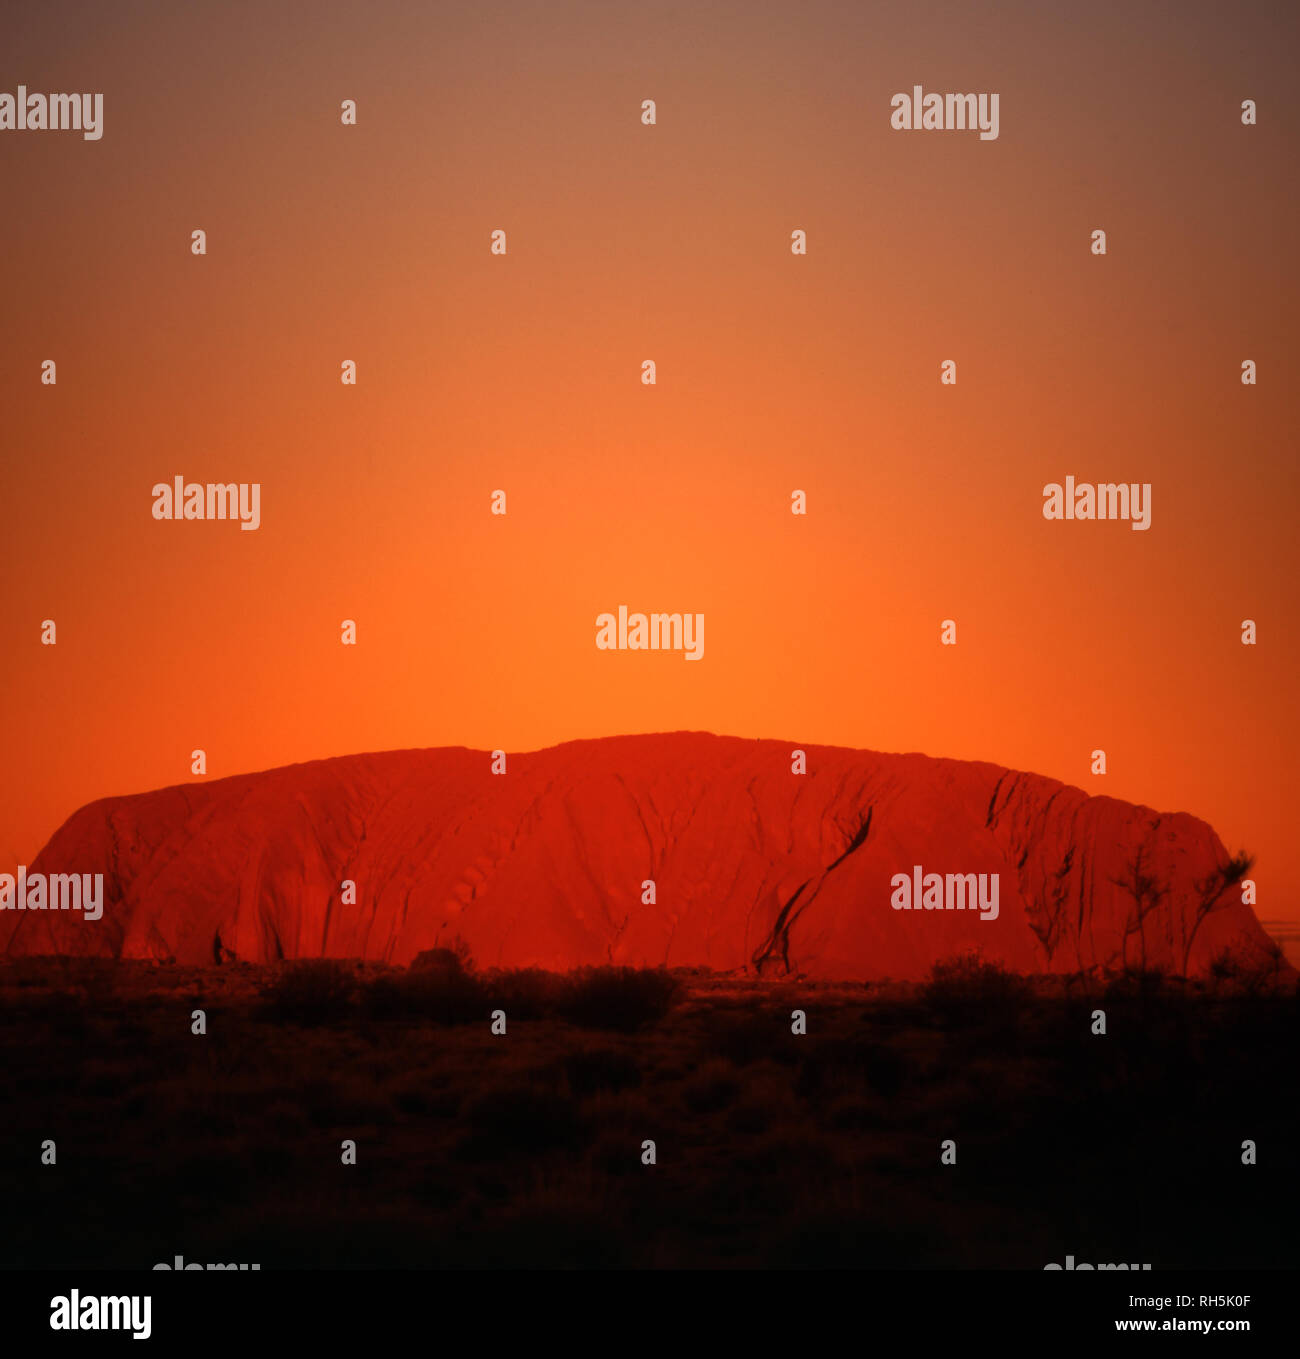 Uluru, Ayers Rock in the heart of the Northern Territory’s Red Centre desert is considered one of Australia's leading tourist attractions. Stock Photo